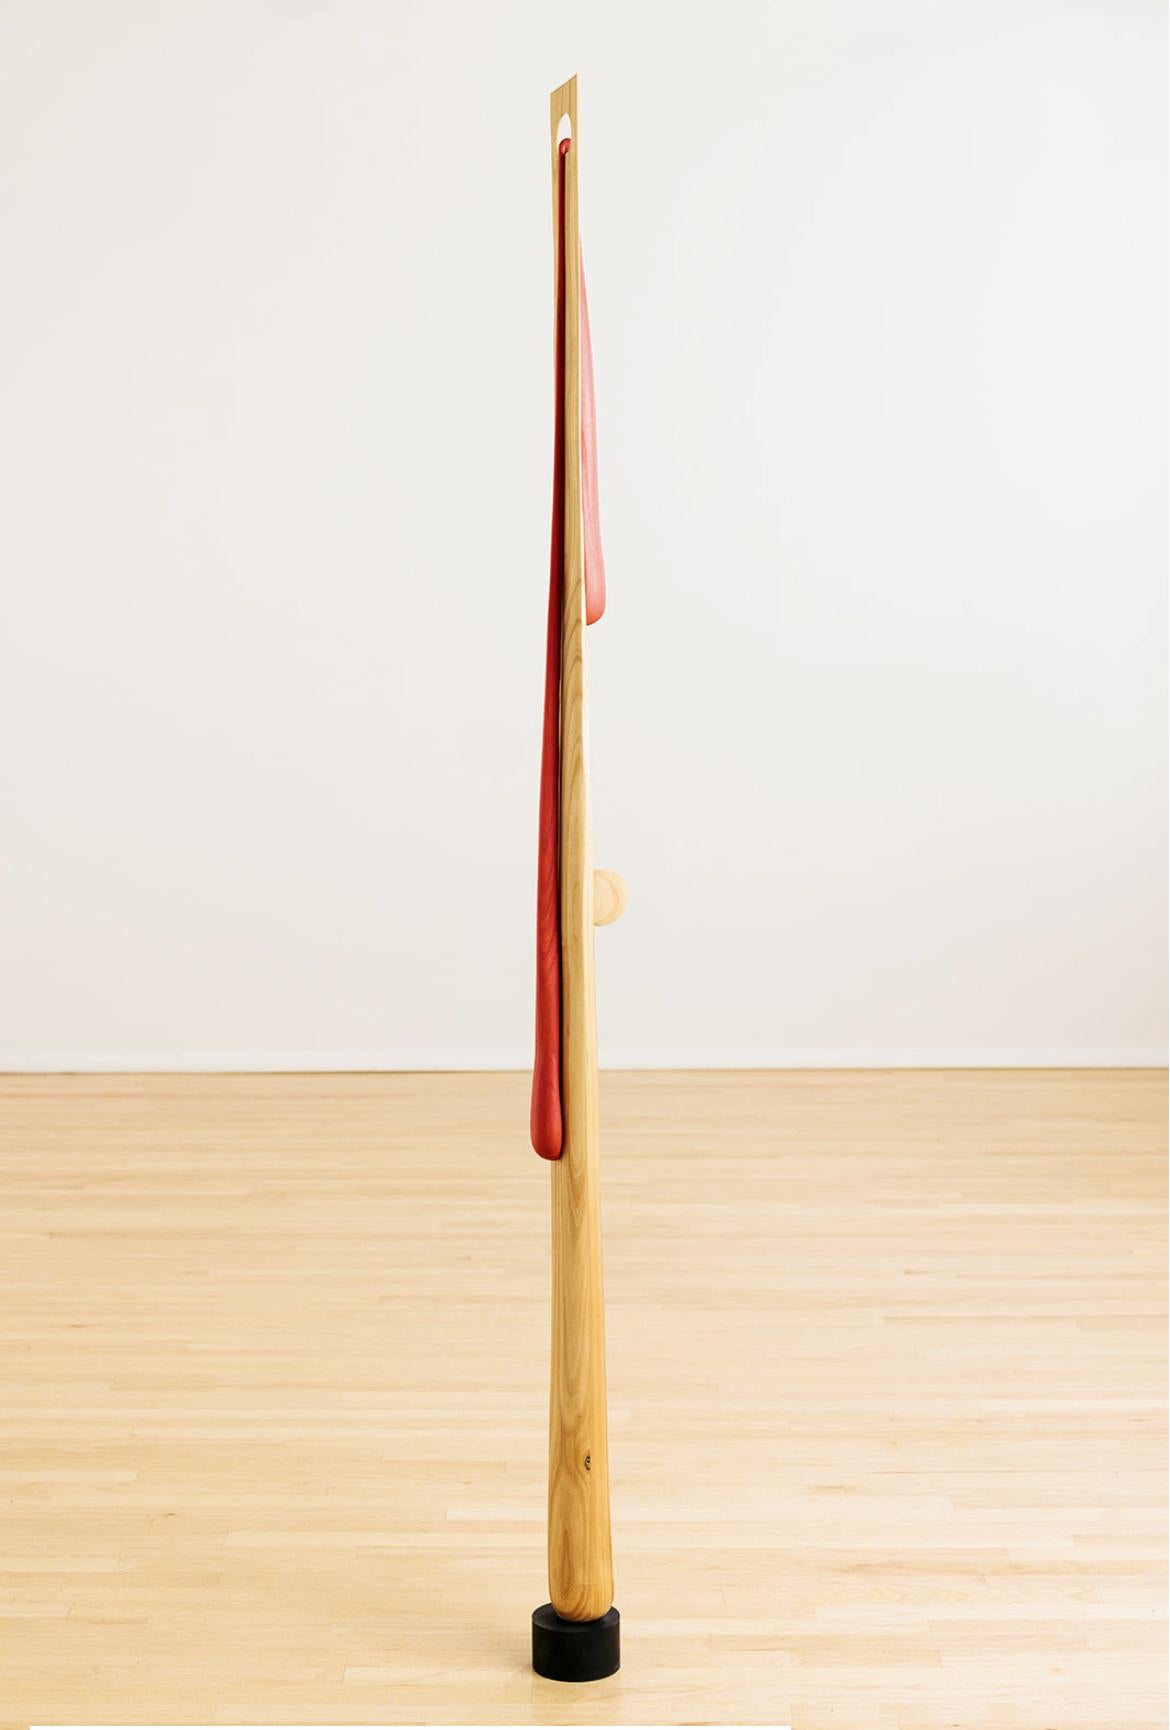 This hand-carved poplar sculpture delicately tapers from bottom to top. From the top, a red-dyed tear drop falls over both sides. Steve Turner slowly works the wood, revealing natural elements, rings and knots present in the wood. This modern totem